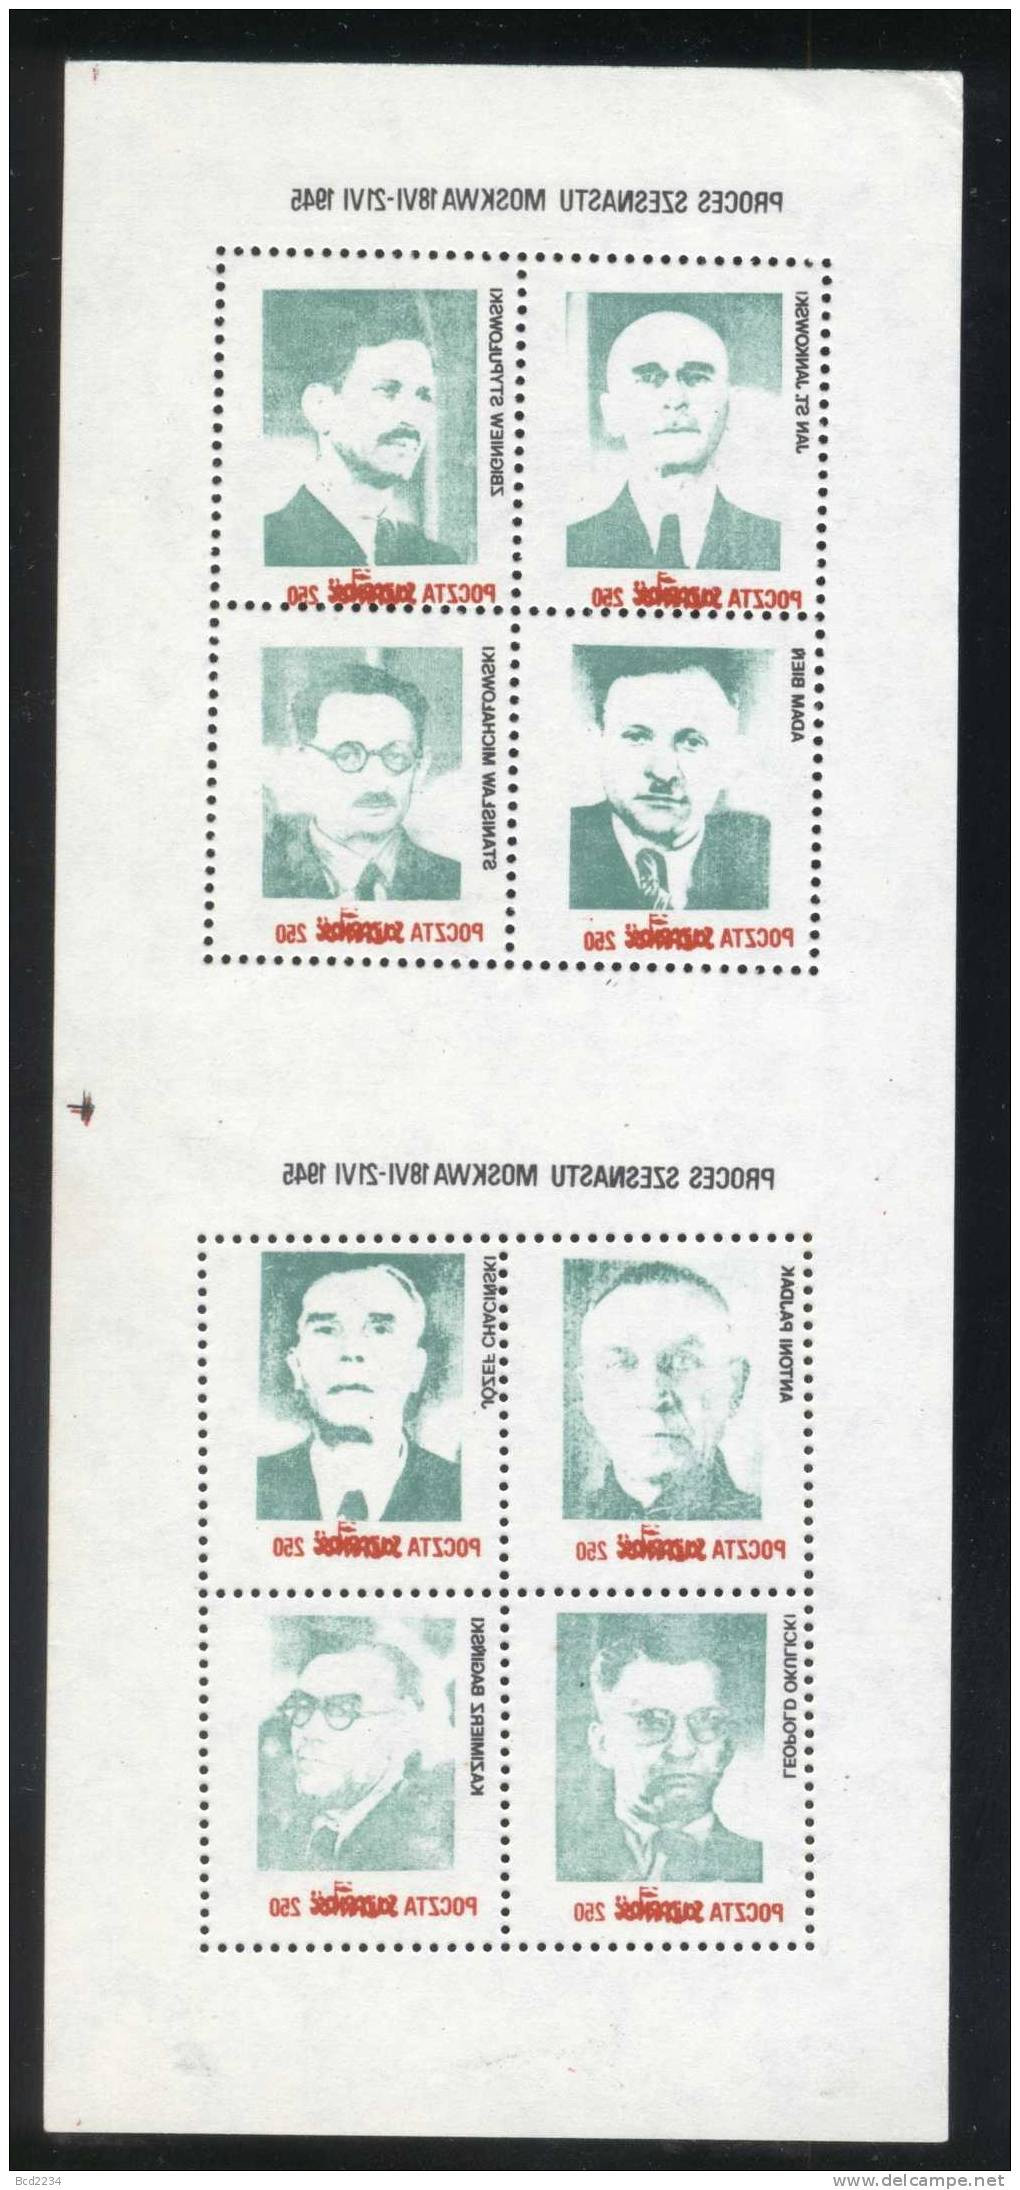 POLAND SOLIDARNOSC SOLIDARITY 2 SHEETS OF 8 GREEN RUSSIAN NKVD PRISONERS TRIAL OF THE 16 COMMUNISM (SOLID 118) - Vignette Solidarnosc